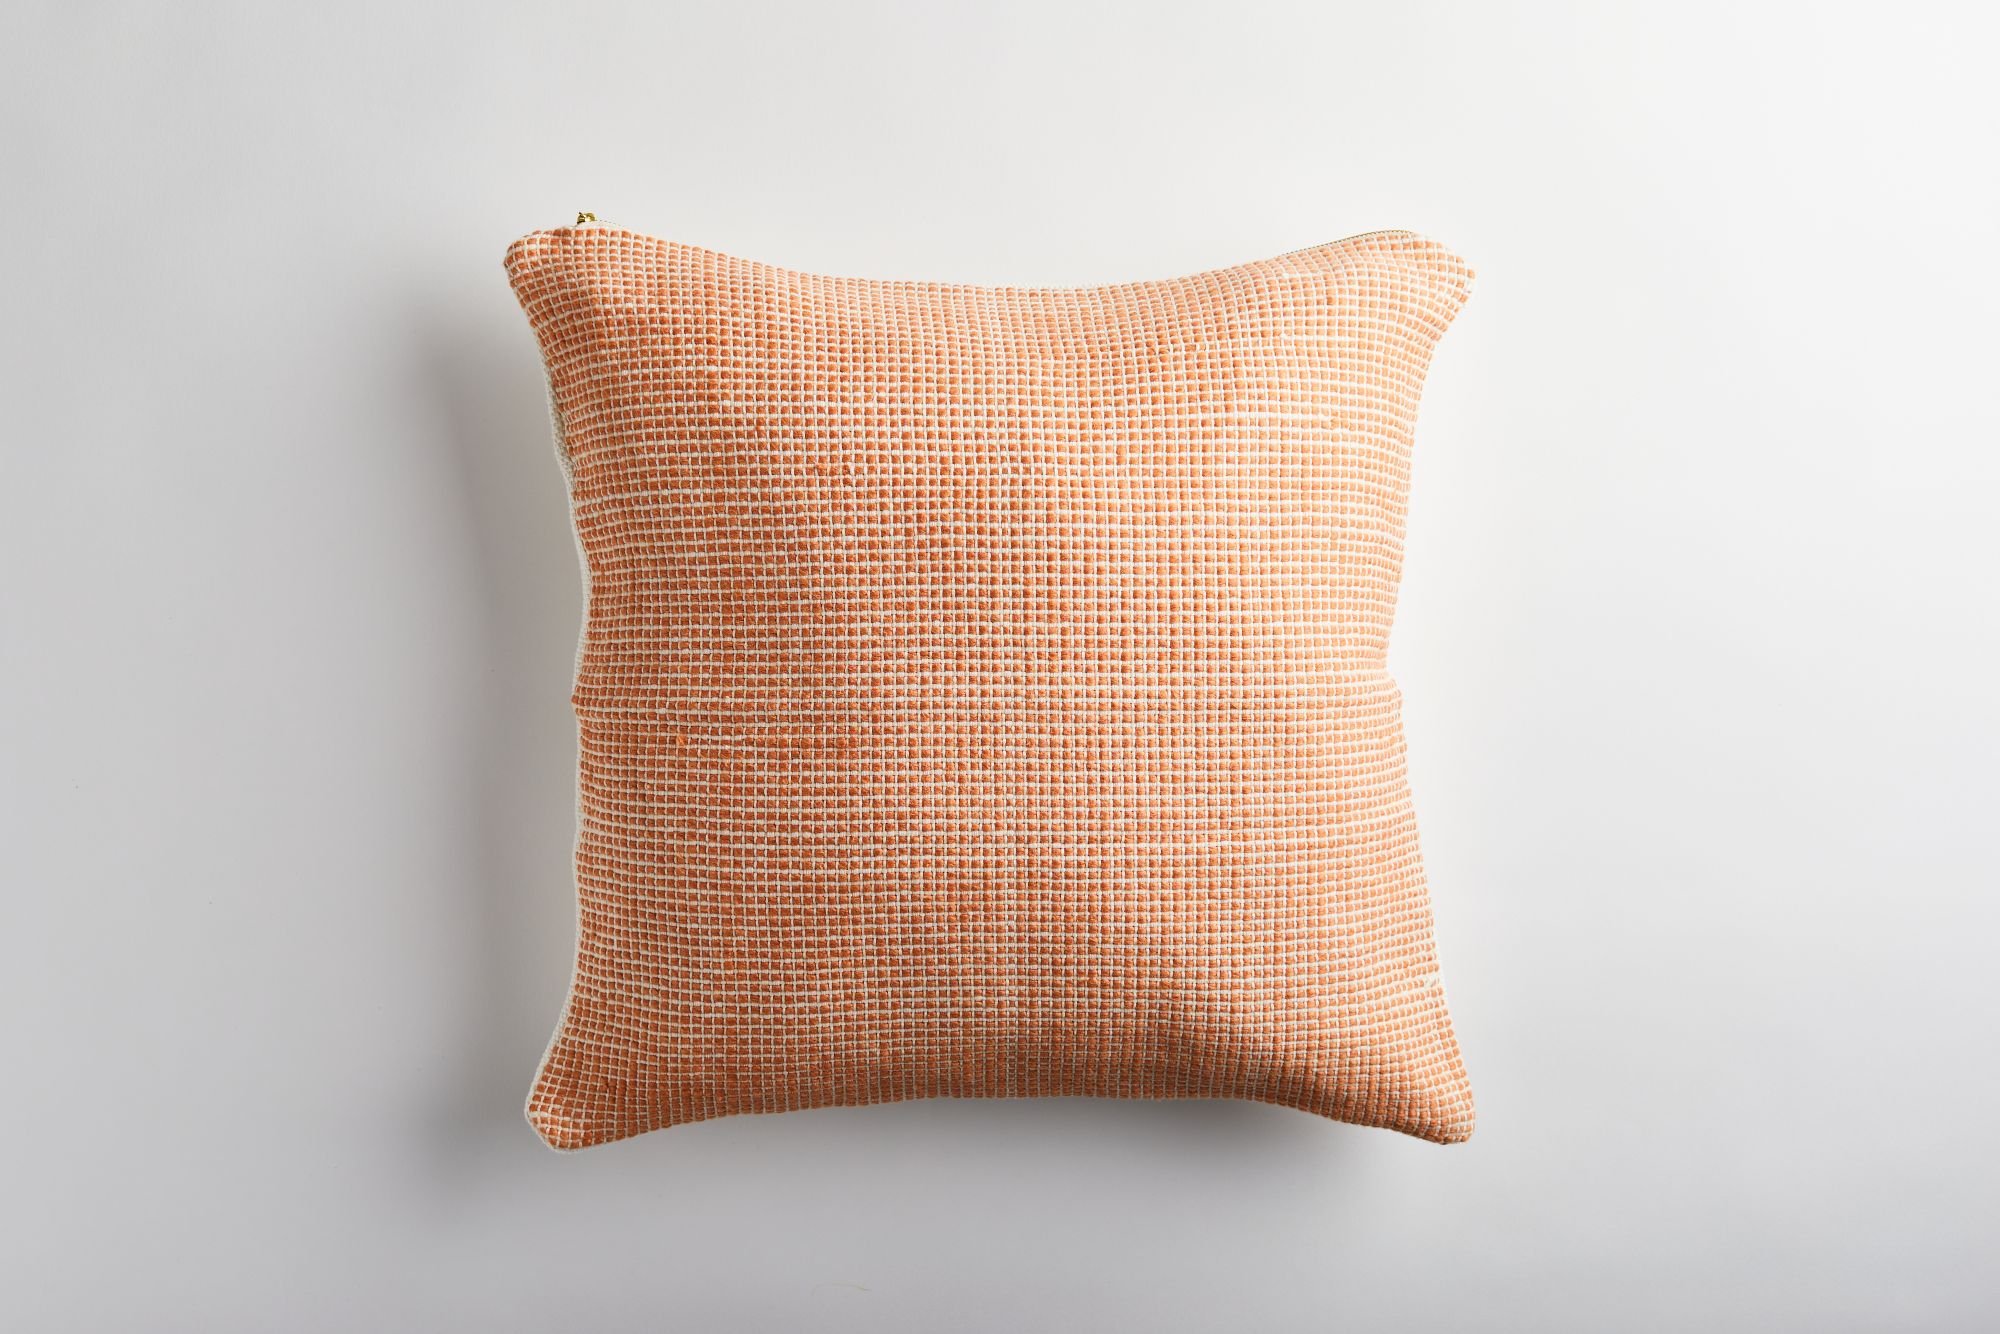 Cocuy Sunrise Pillow Cover - $92